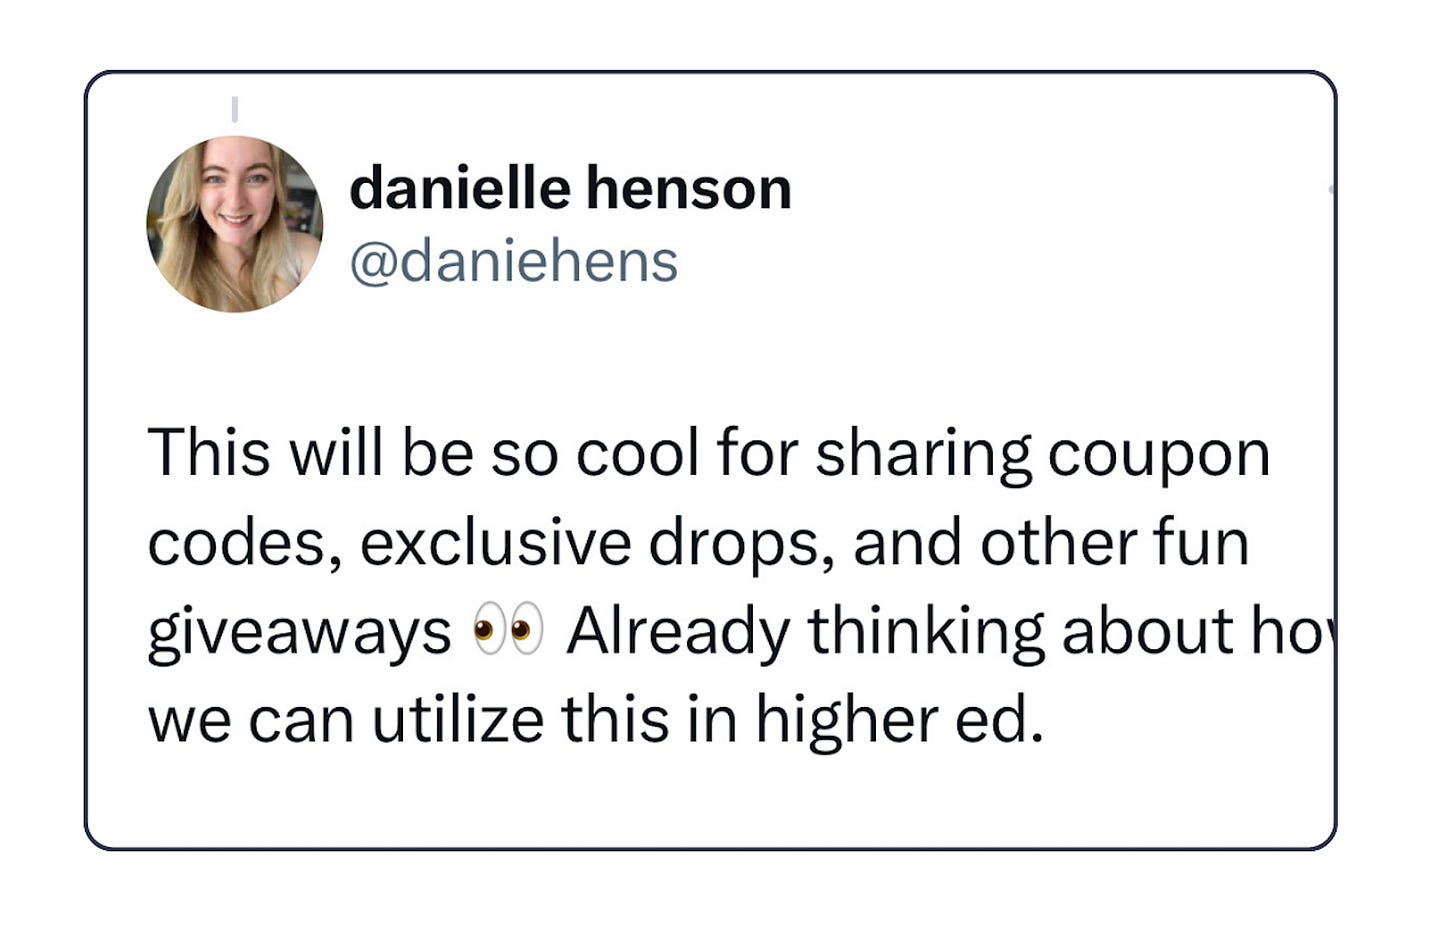 tweet from Danielle Henson that reads: This will be so cool for sharing coupon codes, exclusive drops, and other fun giveaways 👀 Already thinking about how we can utilize this in higher ed.